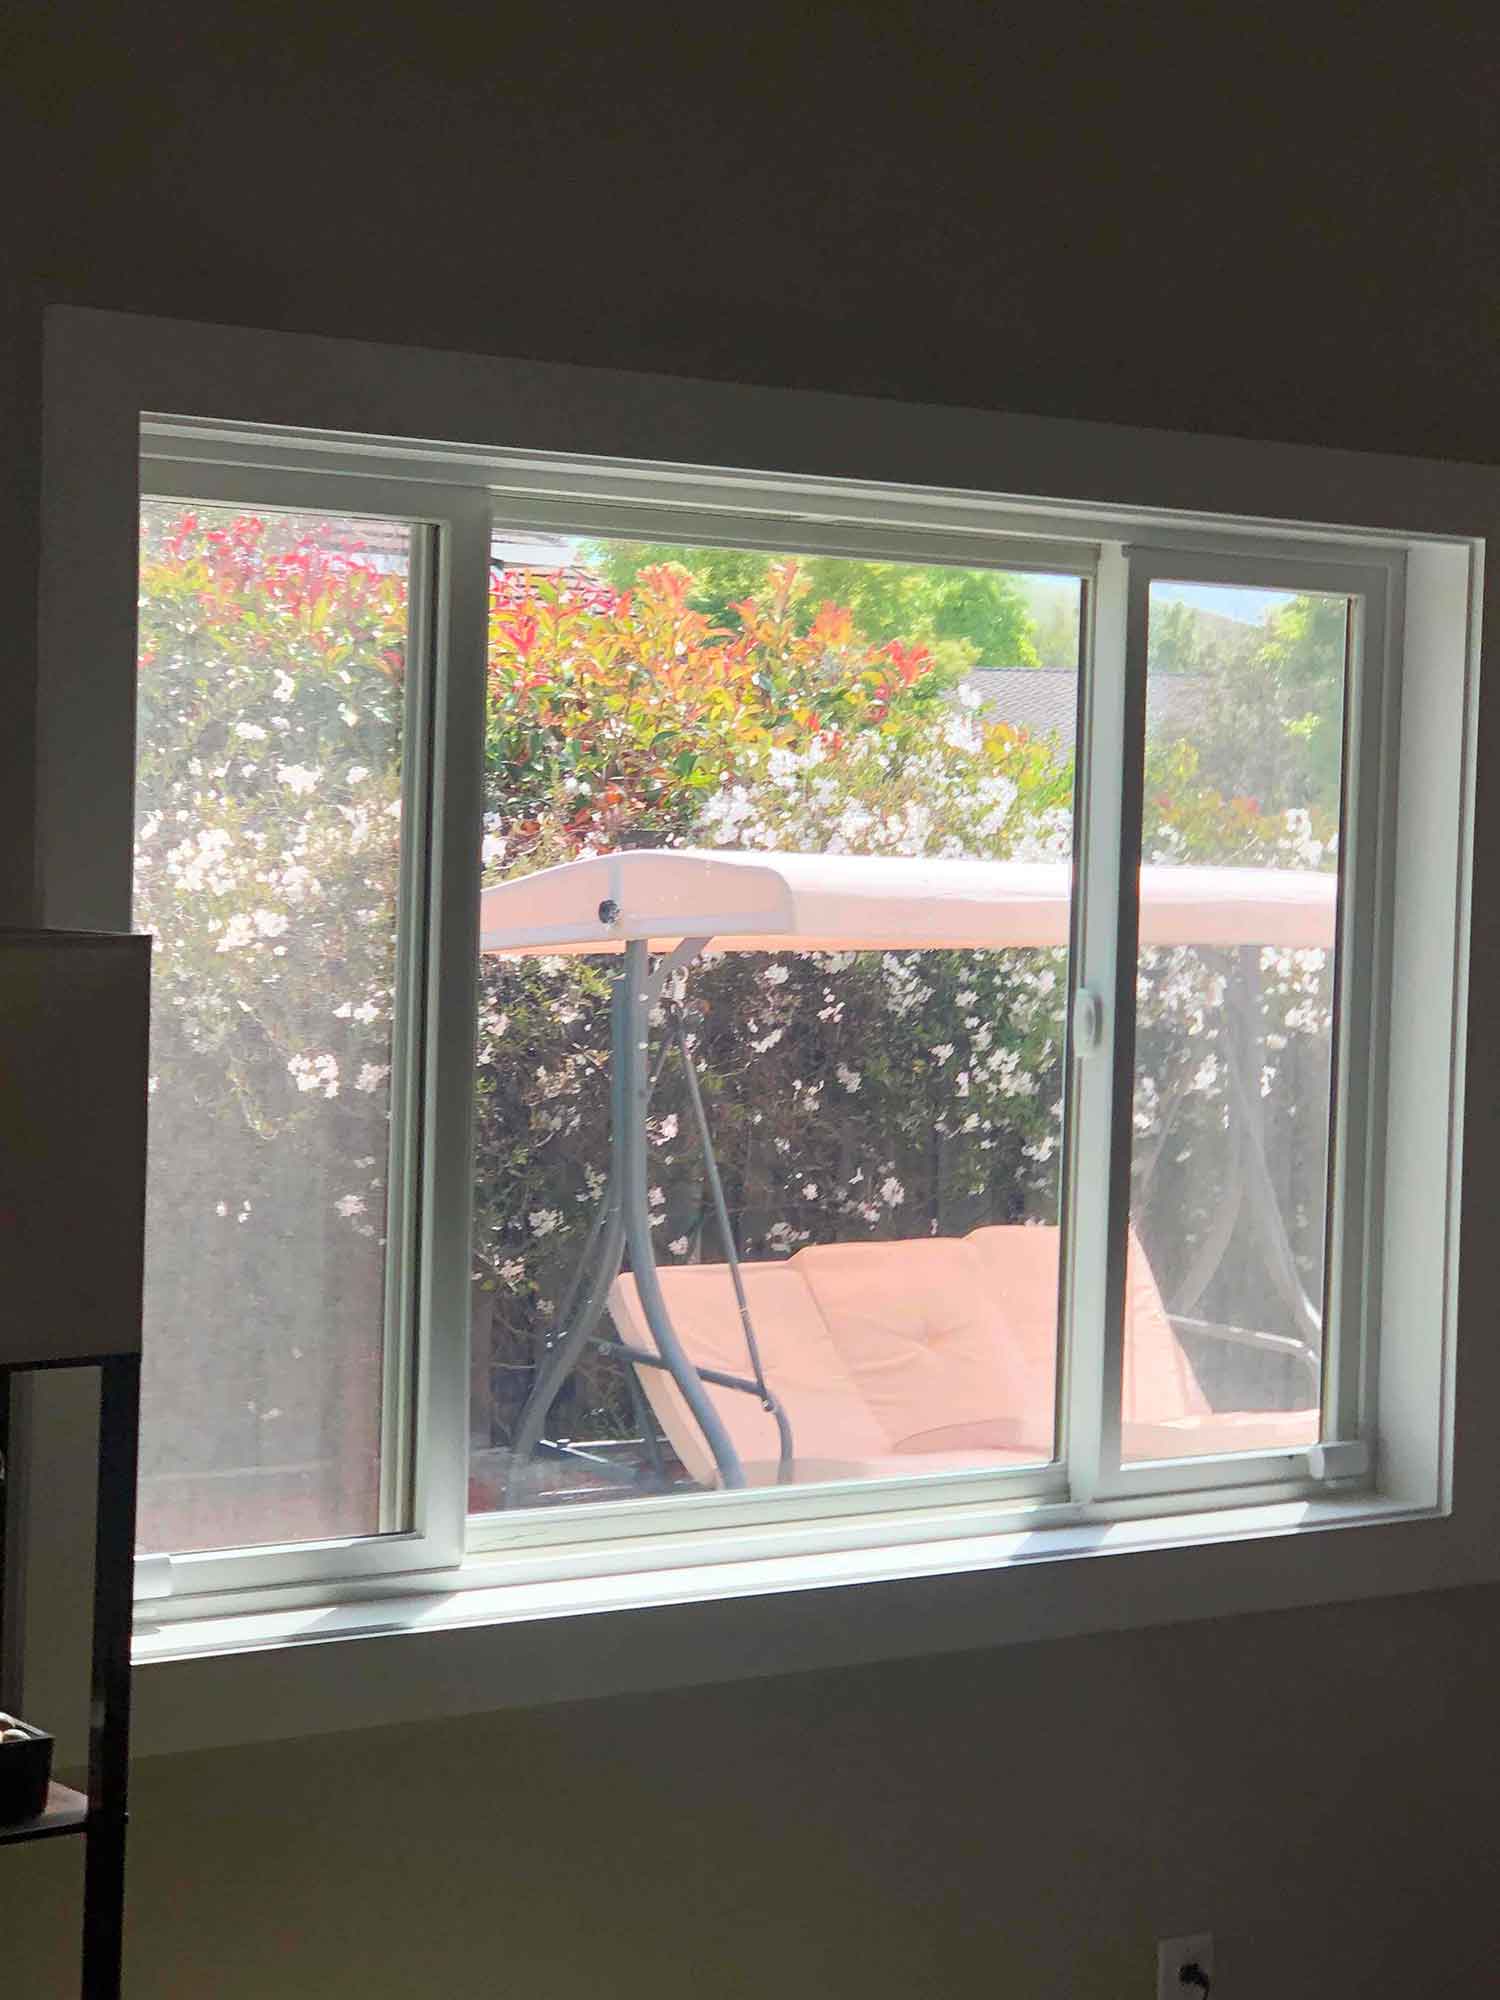 Are you looking for a home or residential window tinting installer in Danville, CA? ClimatePro offers home window tinting services for the East Bay and the surrounding areas.